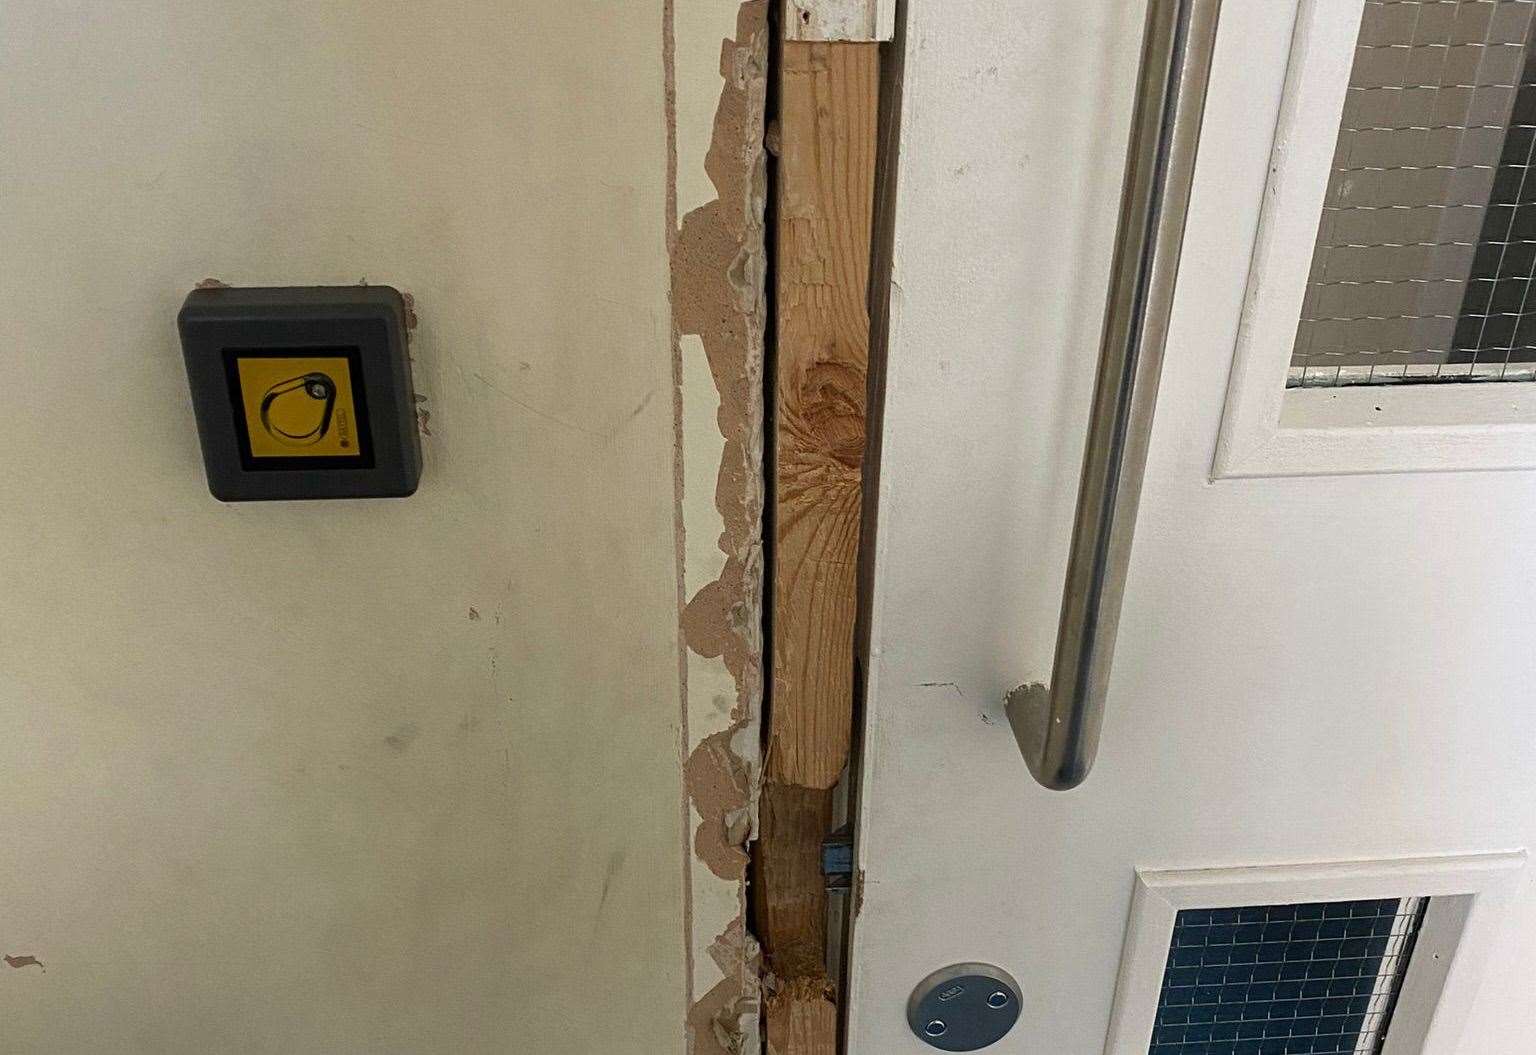 Residents have key fobs to get into Stanhope Court but vandals have forced doors open